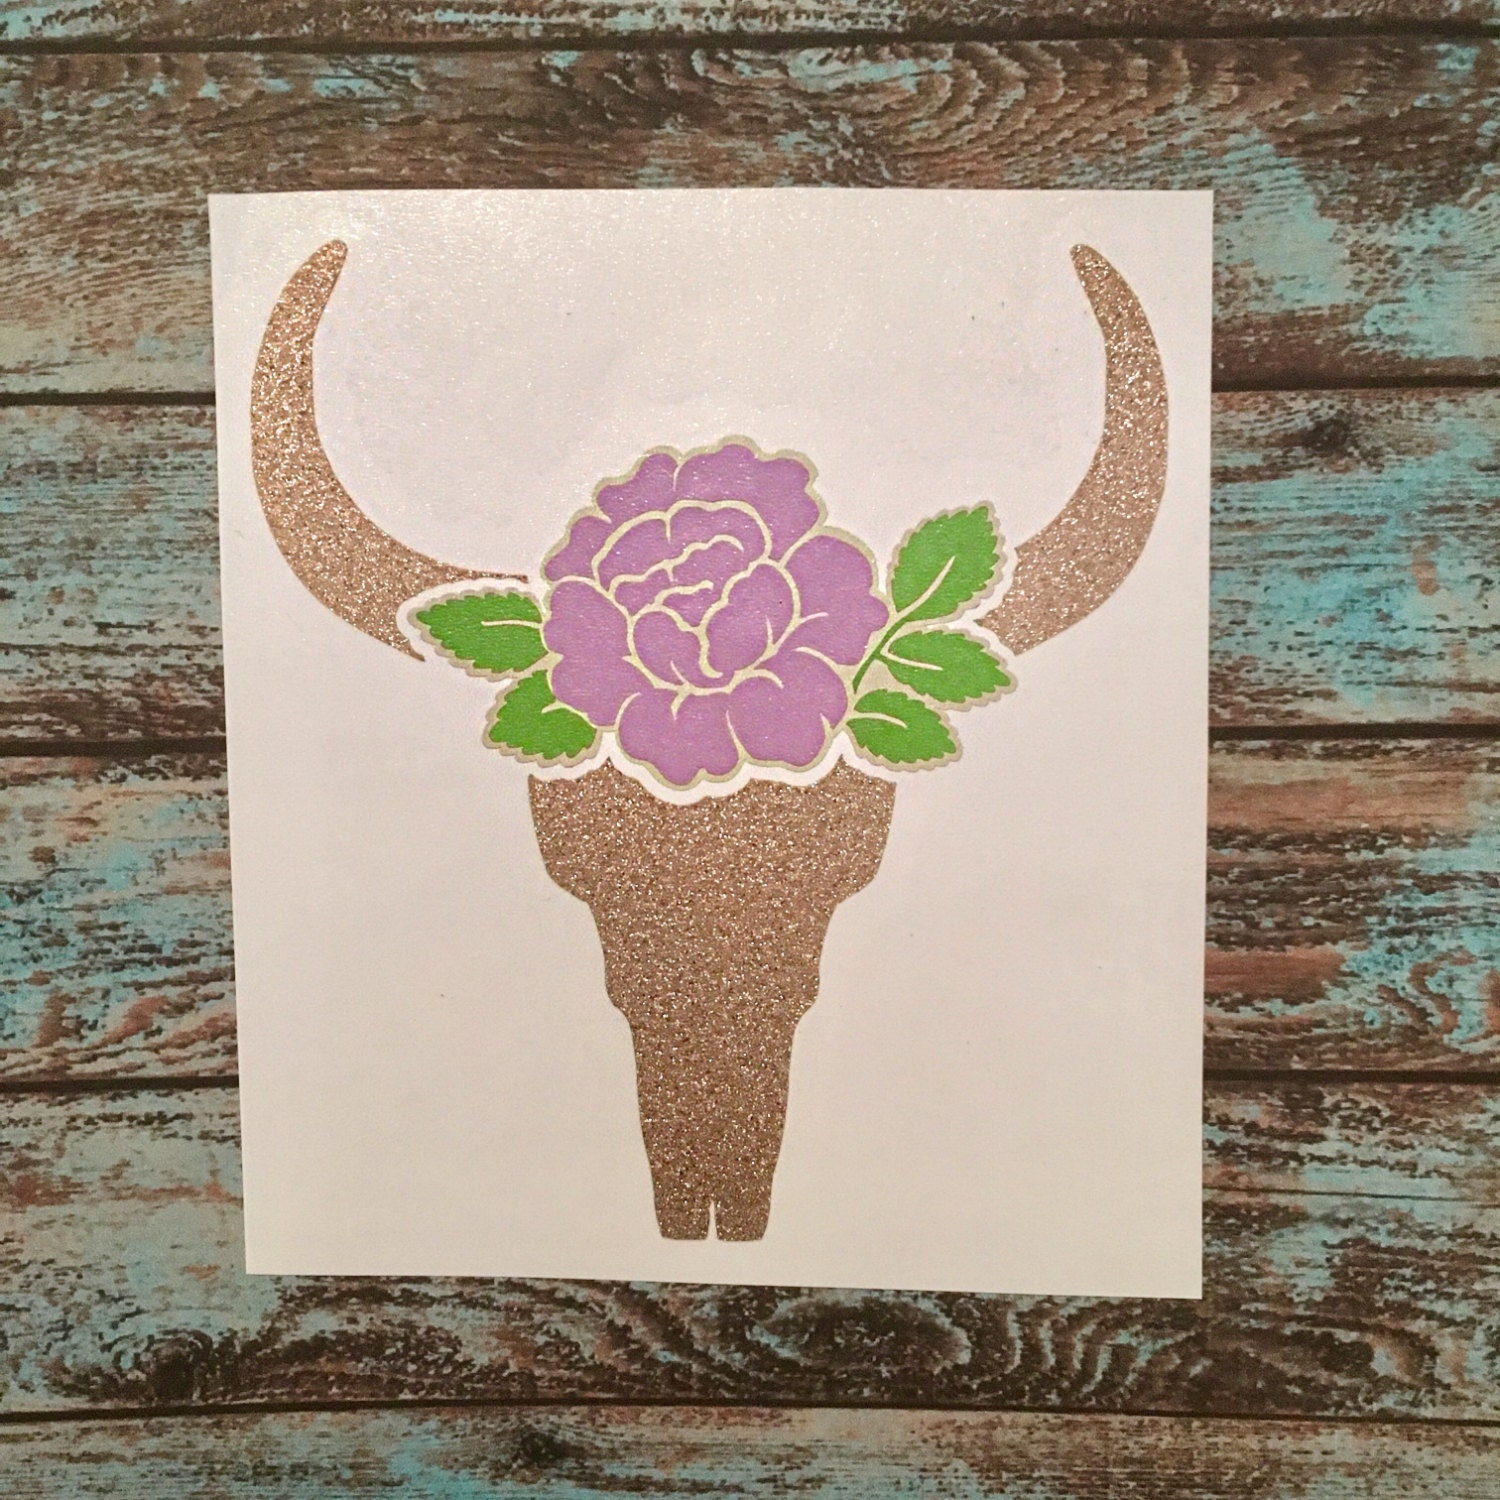 Download Cow Skull with Flower Rose Vinyl Decal Steer Skull With or